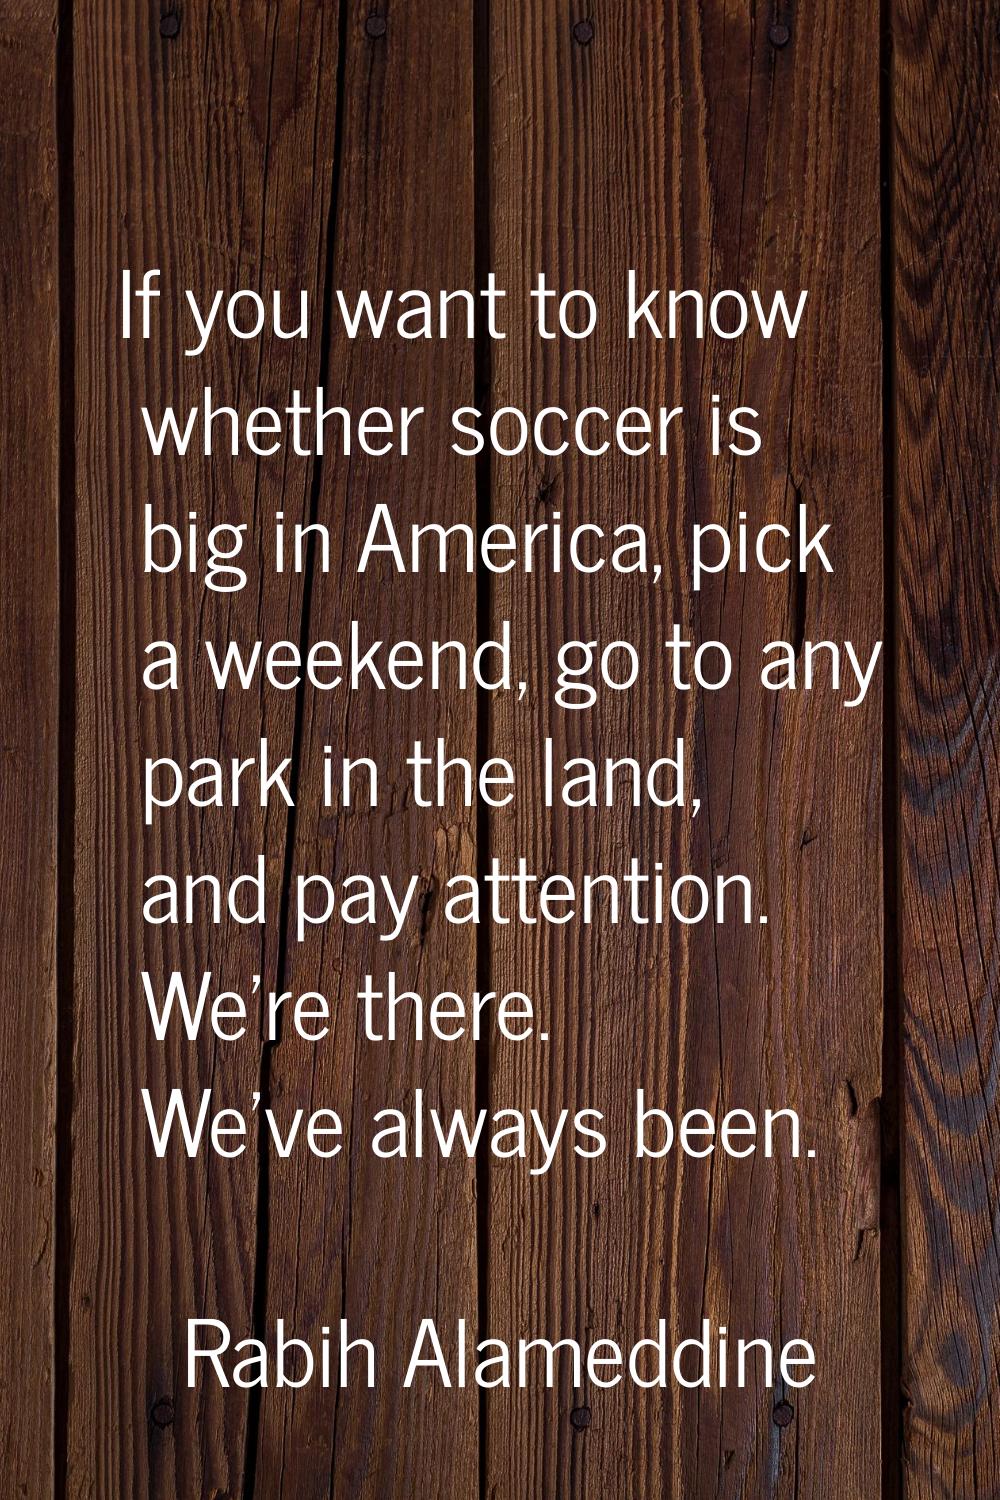 If you want to know whether soccer is big in America, pick a weekend, go to any park in the land, a